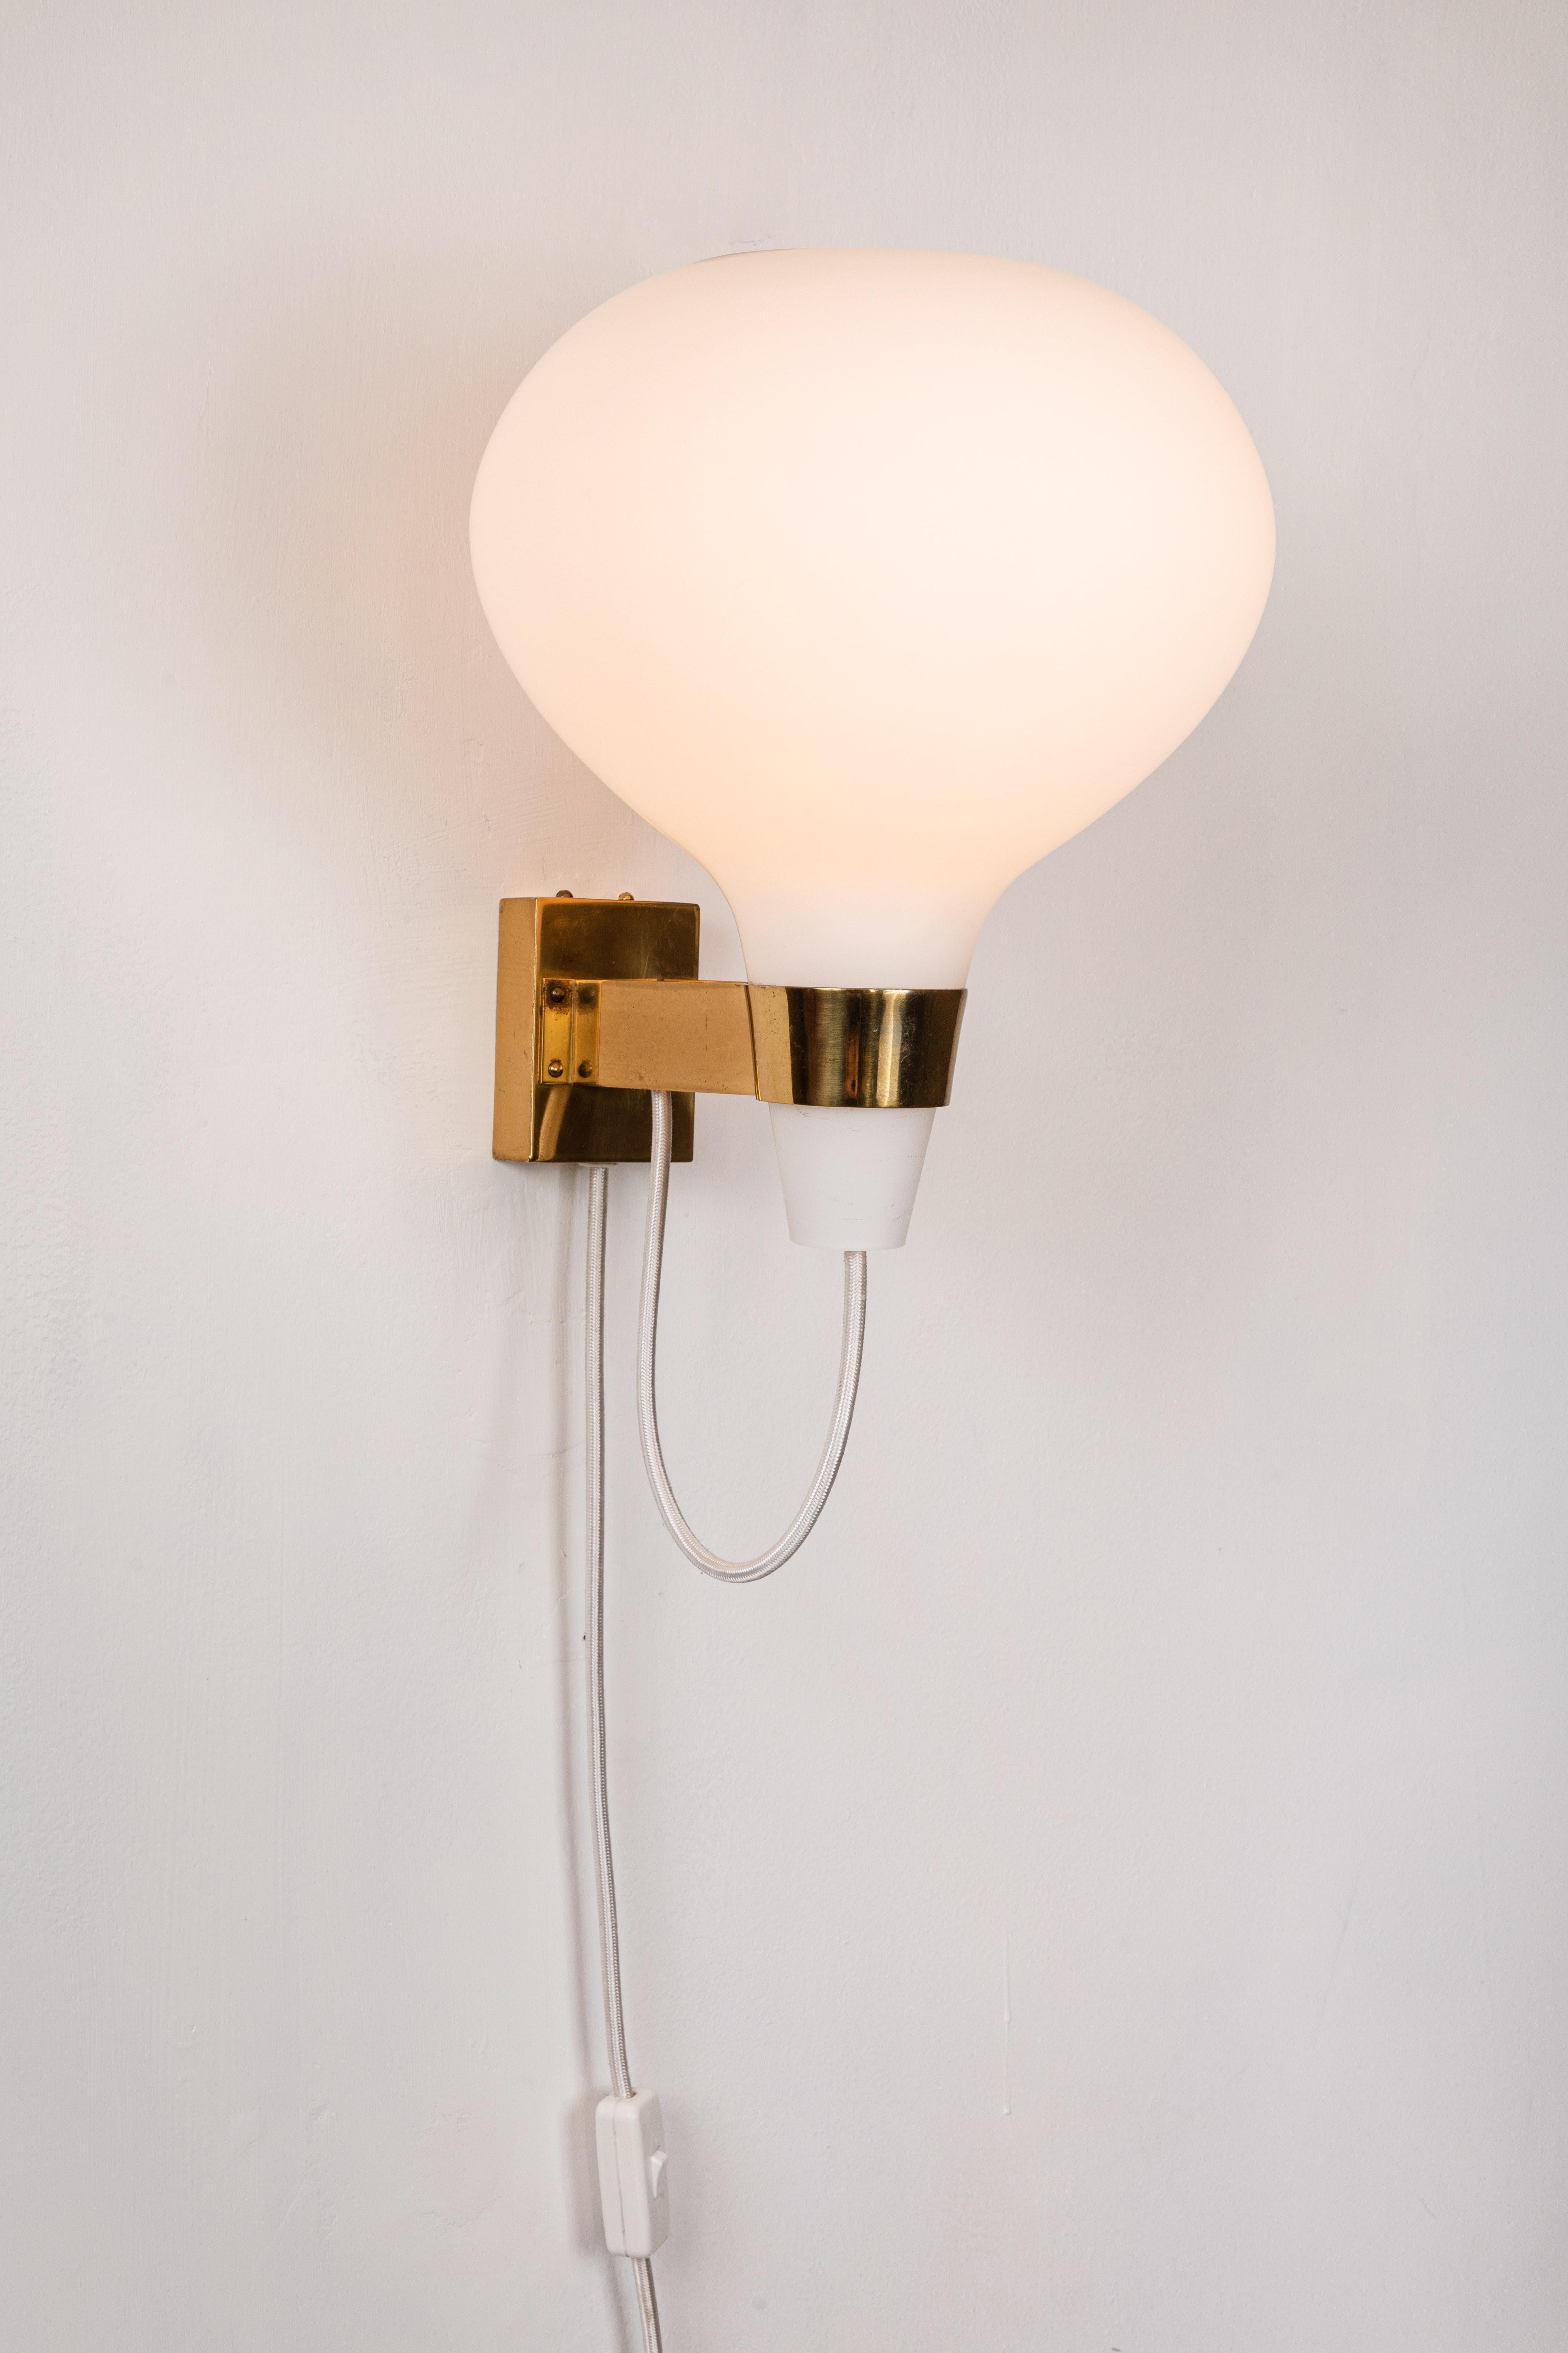 Opaline Glass Large 1950s Lisa Johansson-Pape Bulbo Glass and Brass Wall Lamp for Orno For Sale